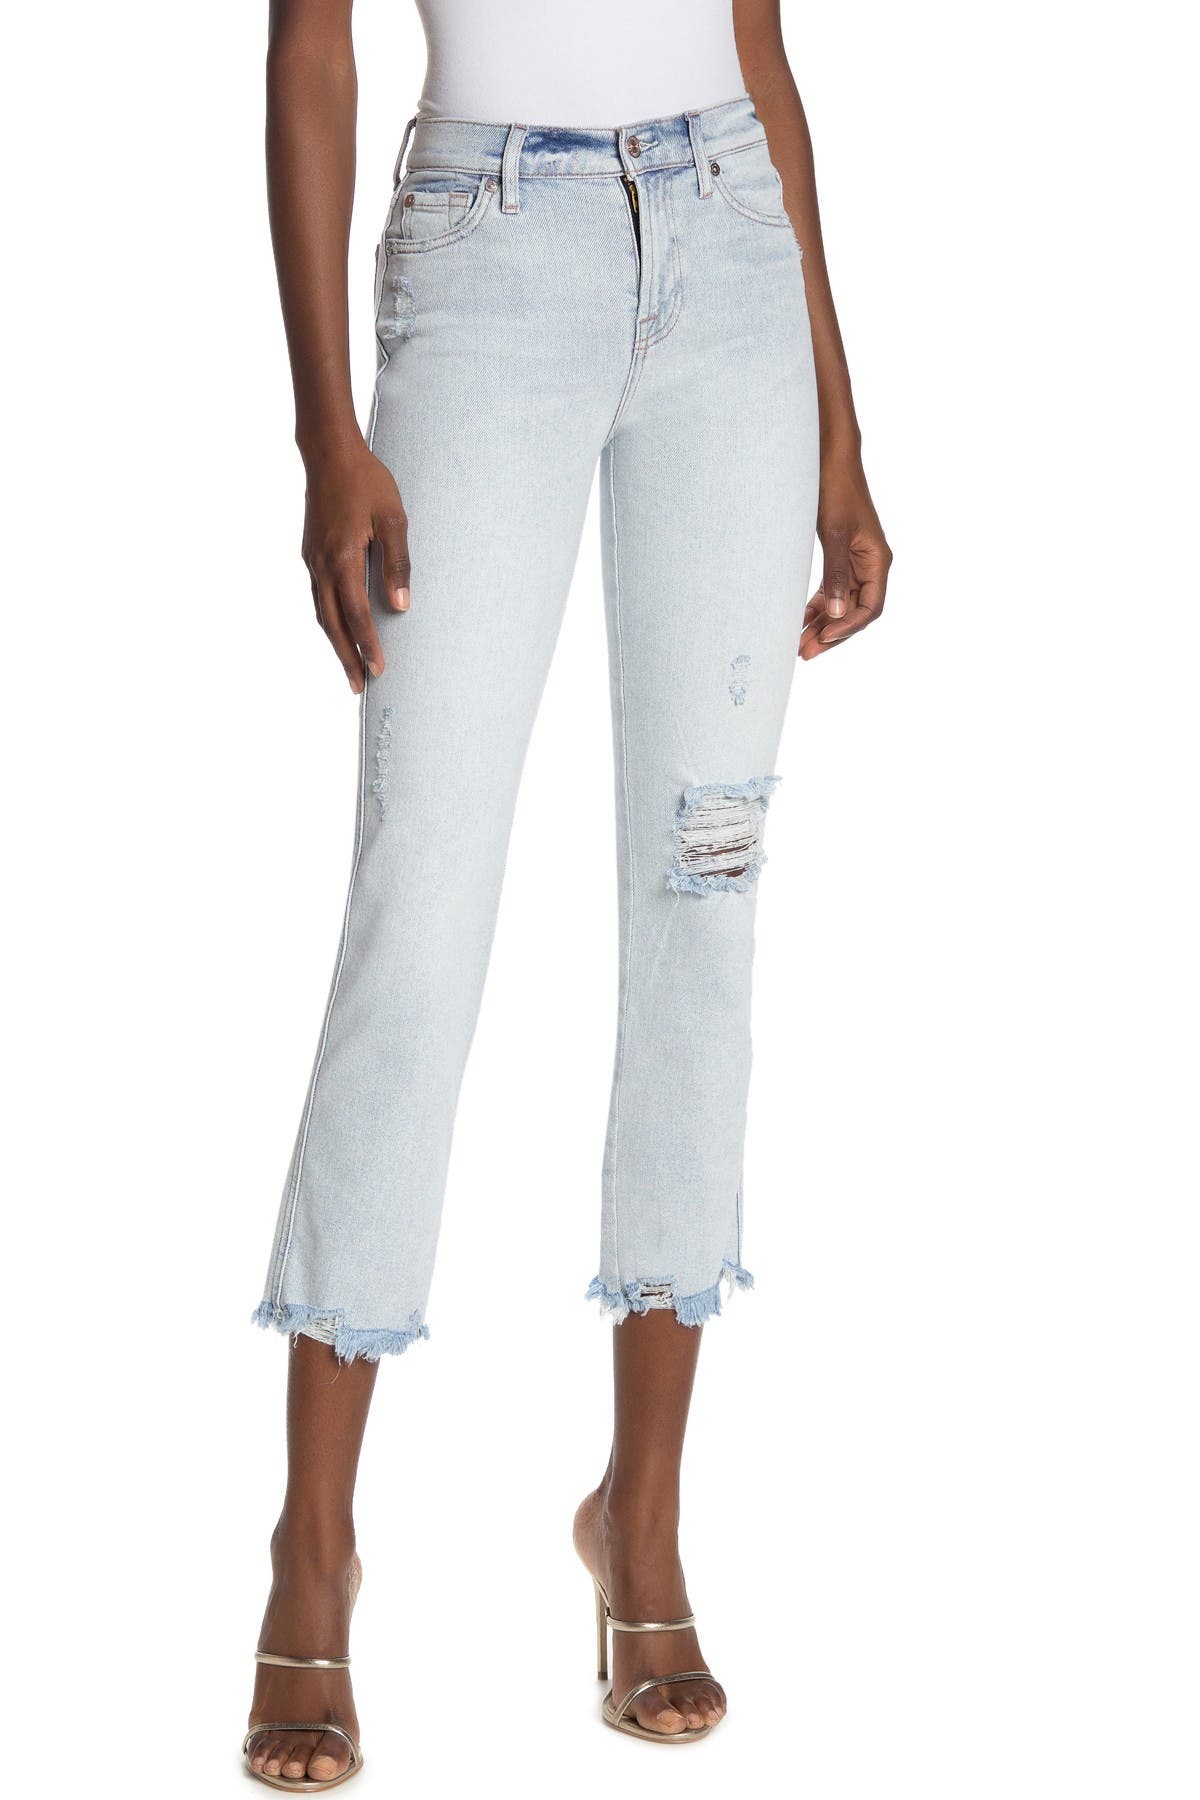 7 for all mankind edie high waist jeans